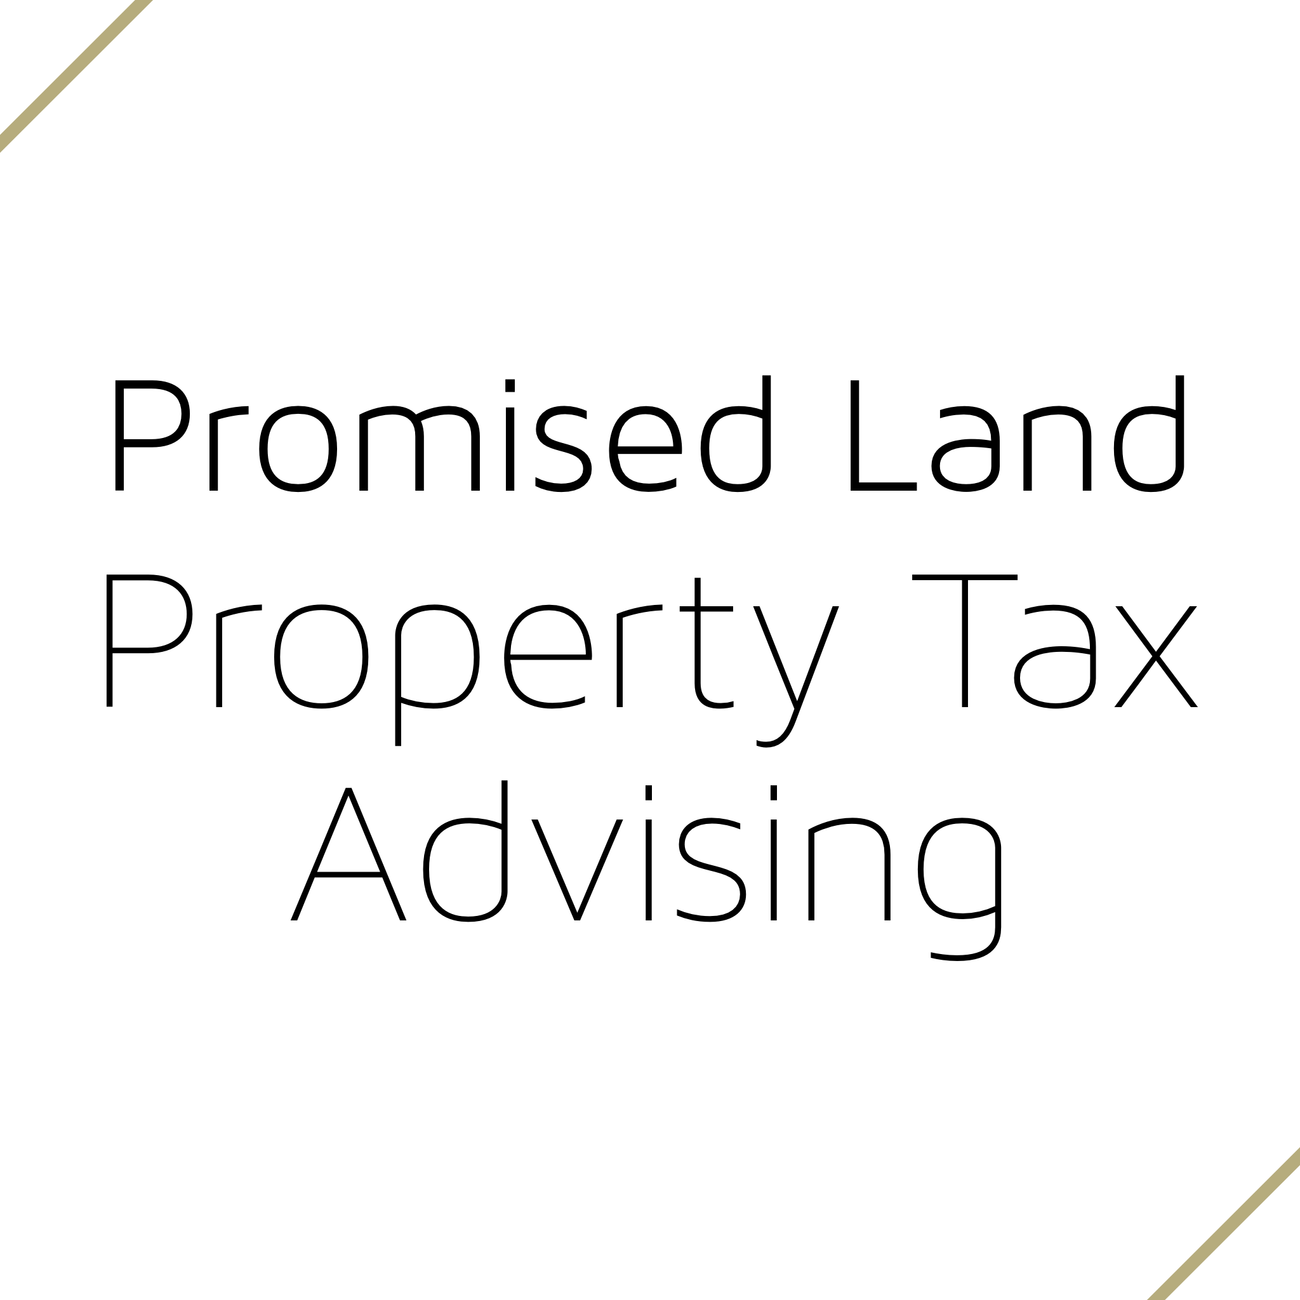 Promised Land: Property Tax Advising